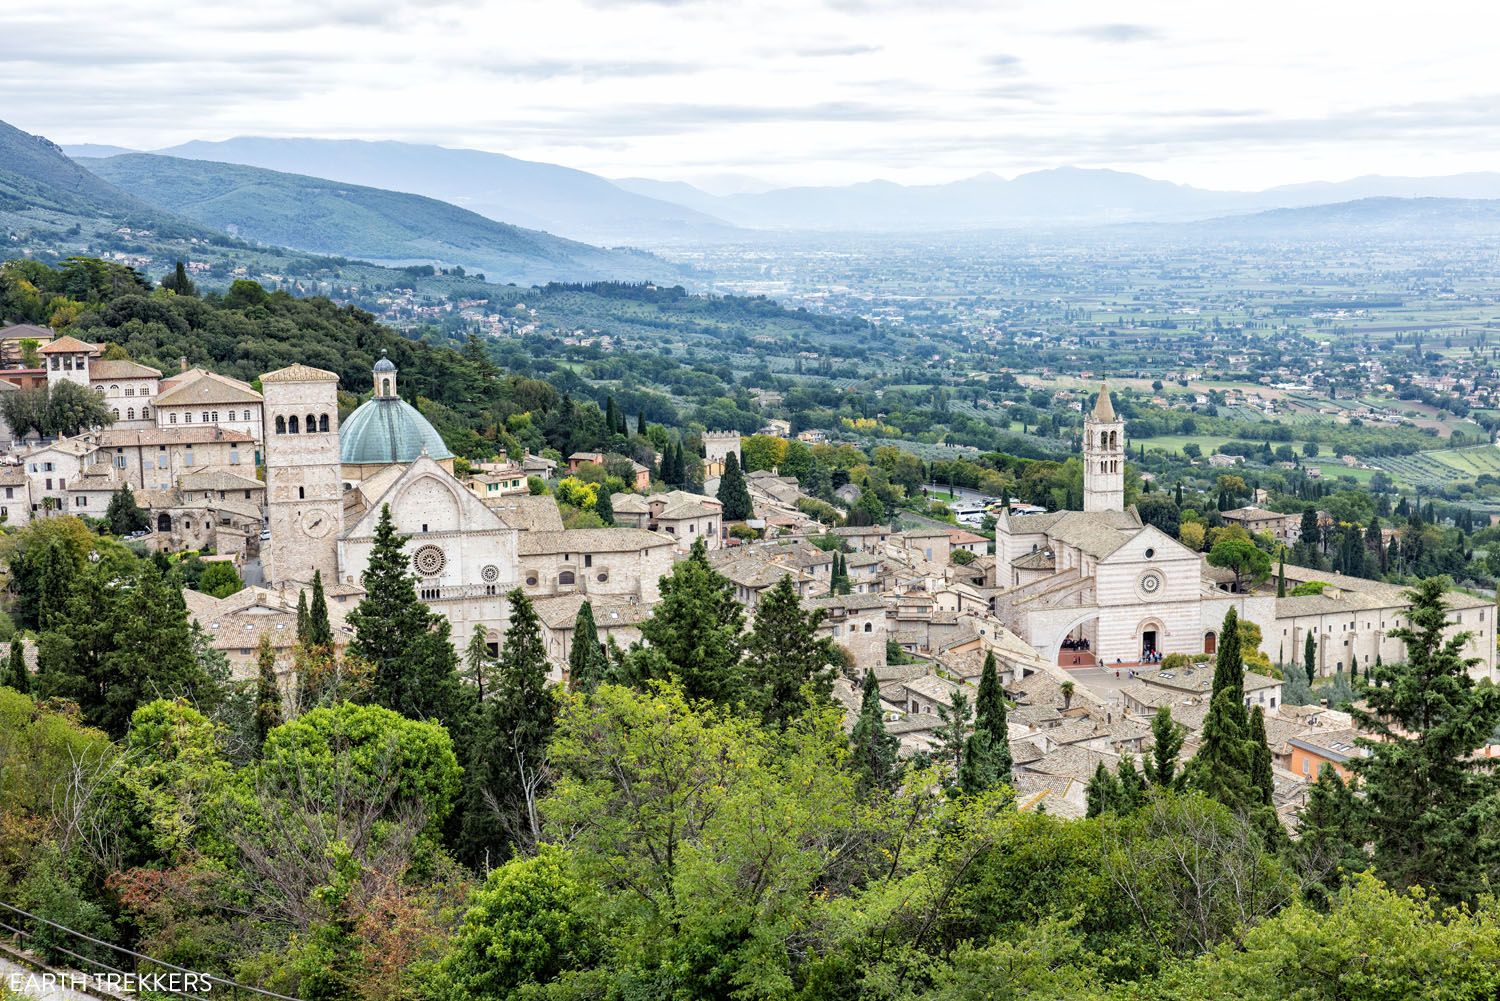 Things to Do in Assisi View | Best Things to Do in Assisi